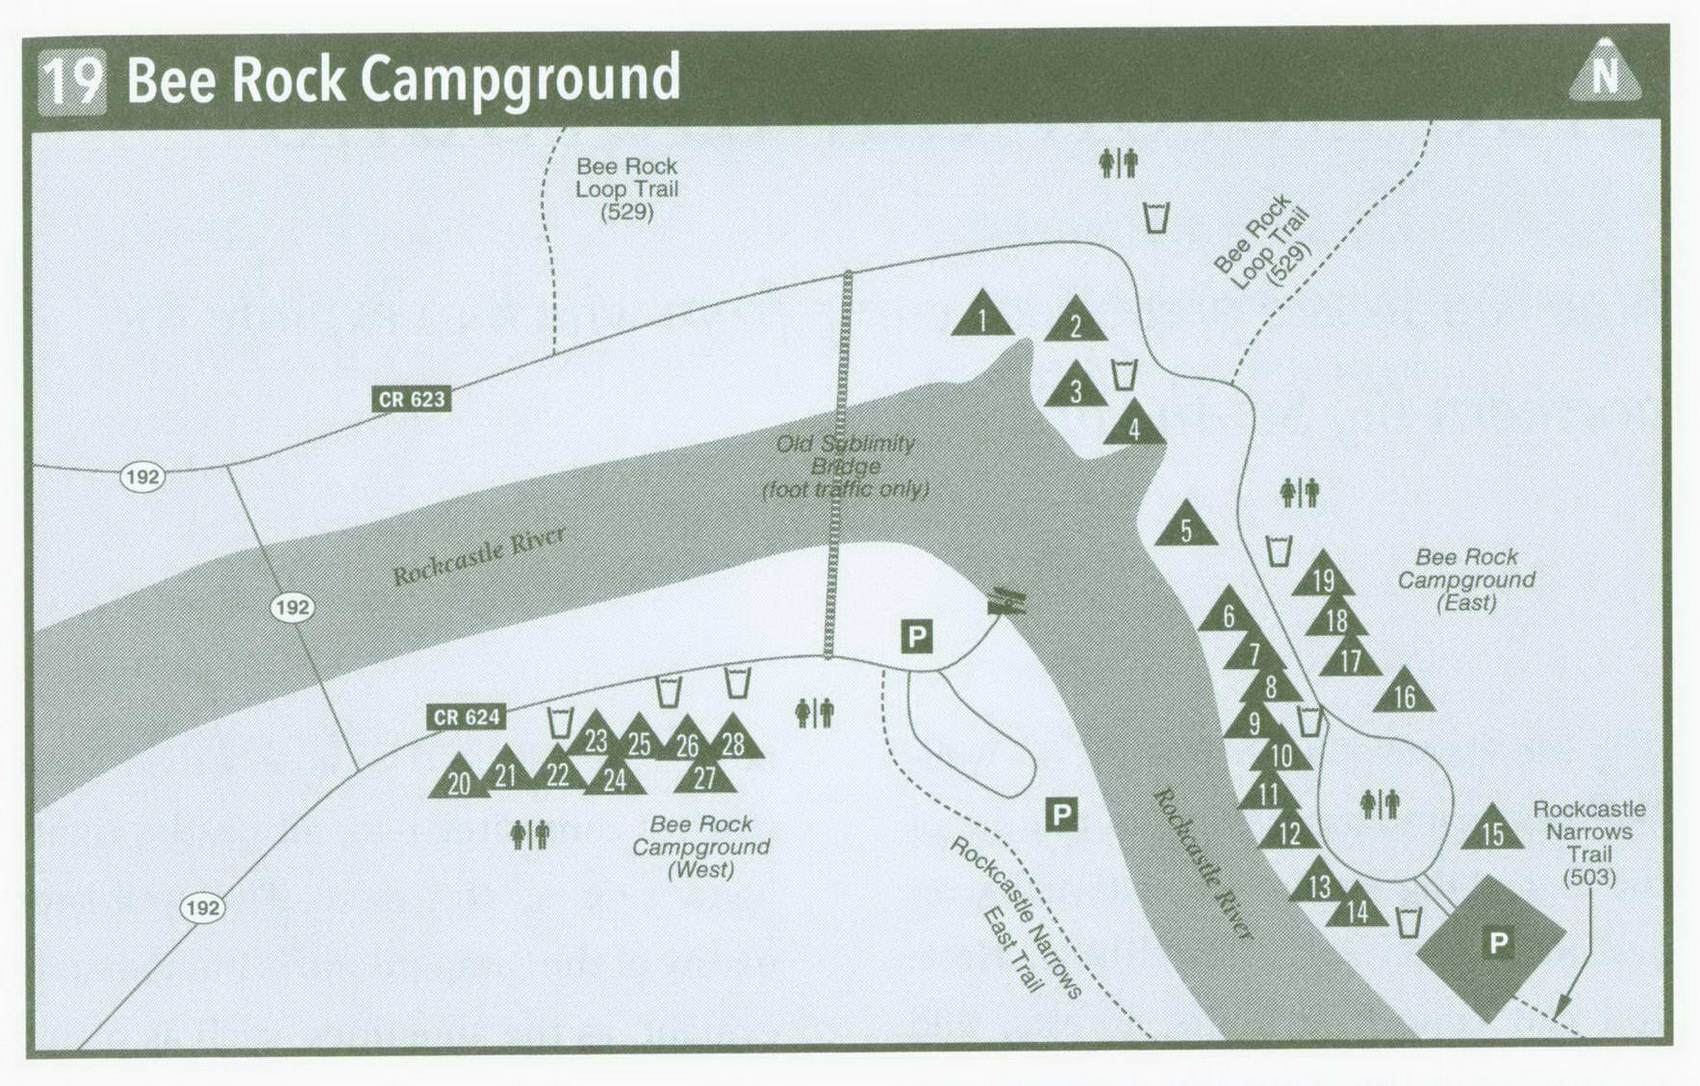 Plan of Bee Rock Campground